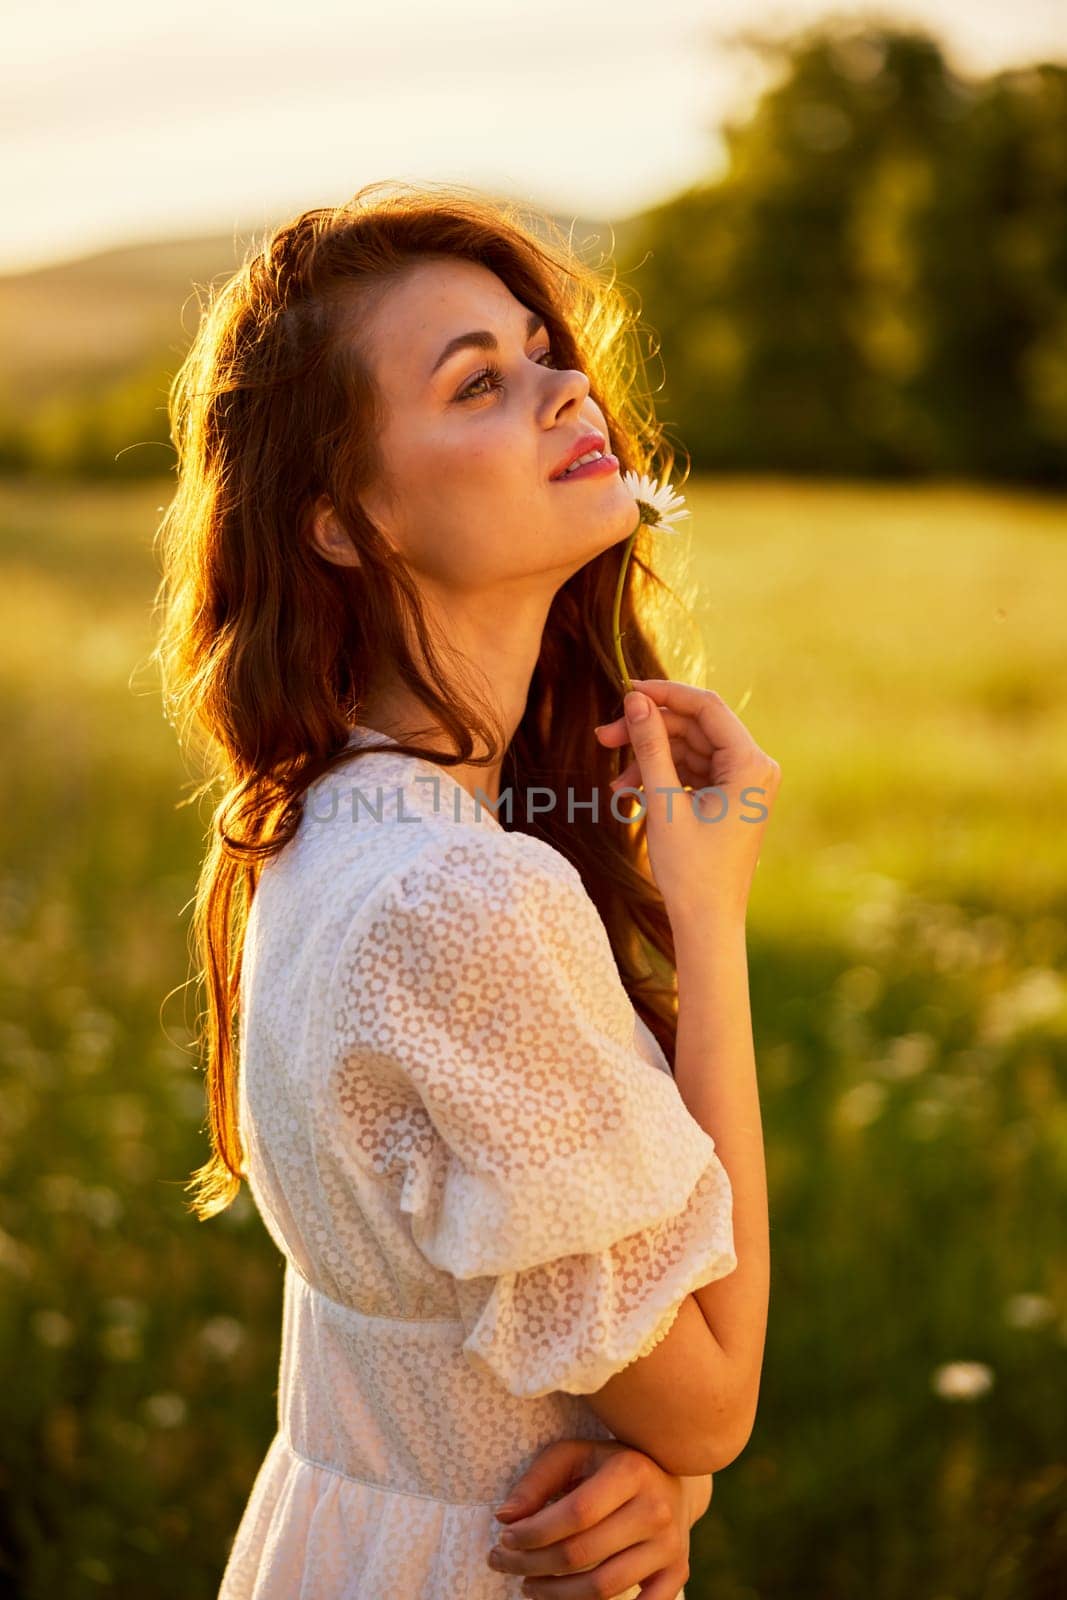 close portrait of a beautiful, laughing woman in a light dress holding a chamomile near her face during sunset, lit from the back. High quality photo